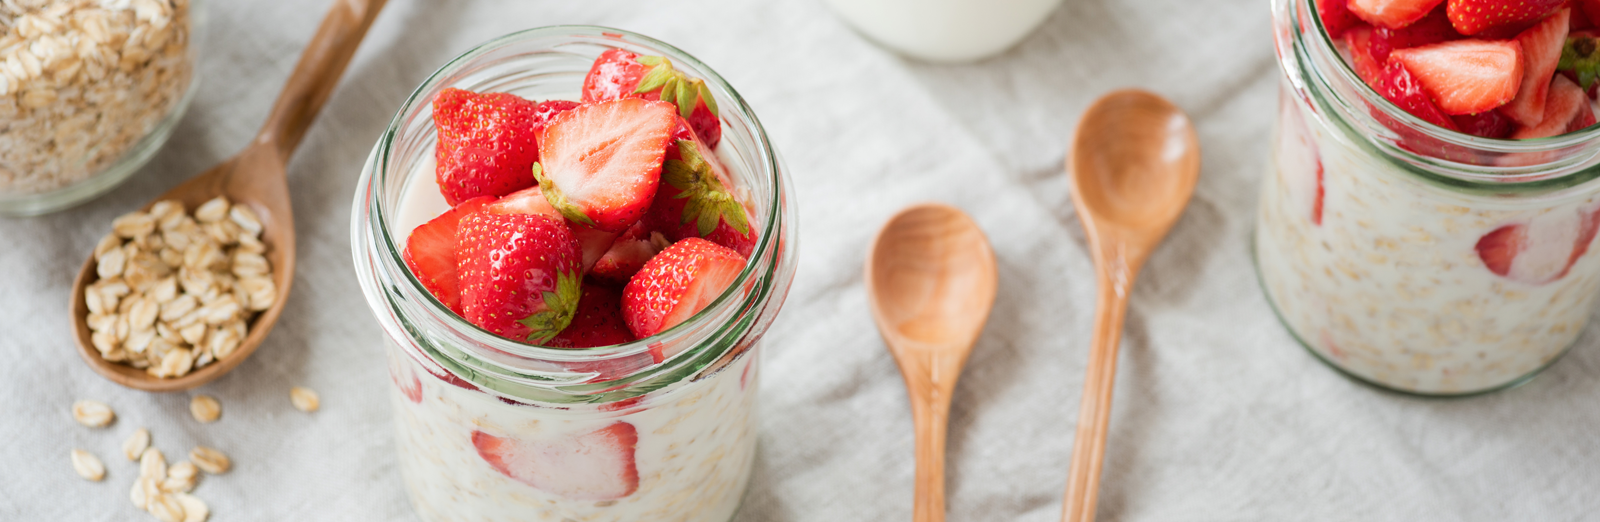 Strawberry-cheesecake-overnight-oats-1600x522.png